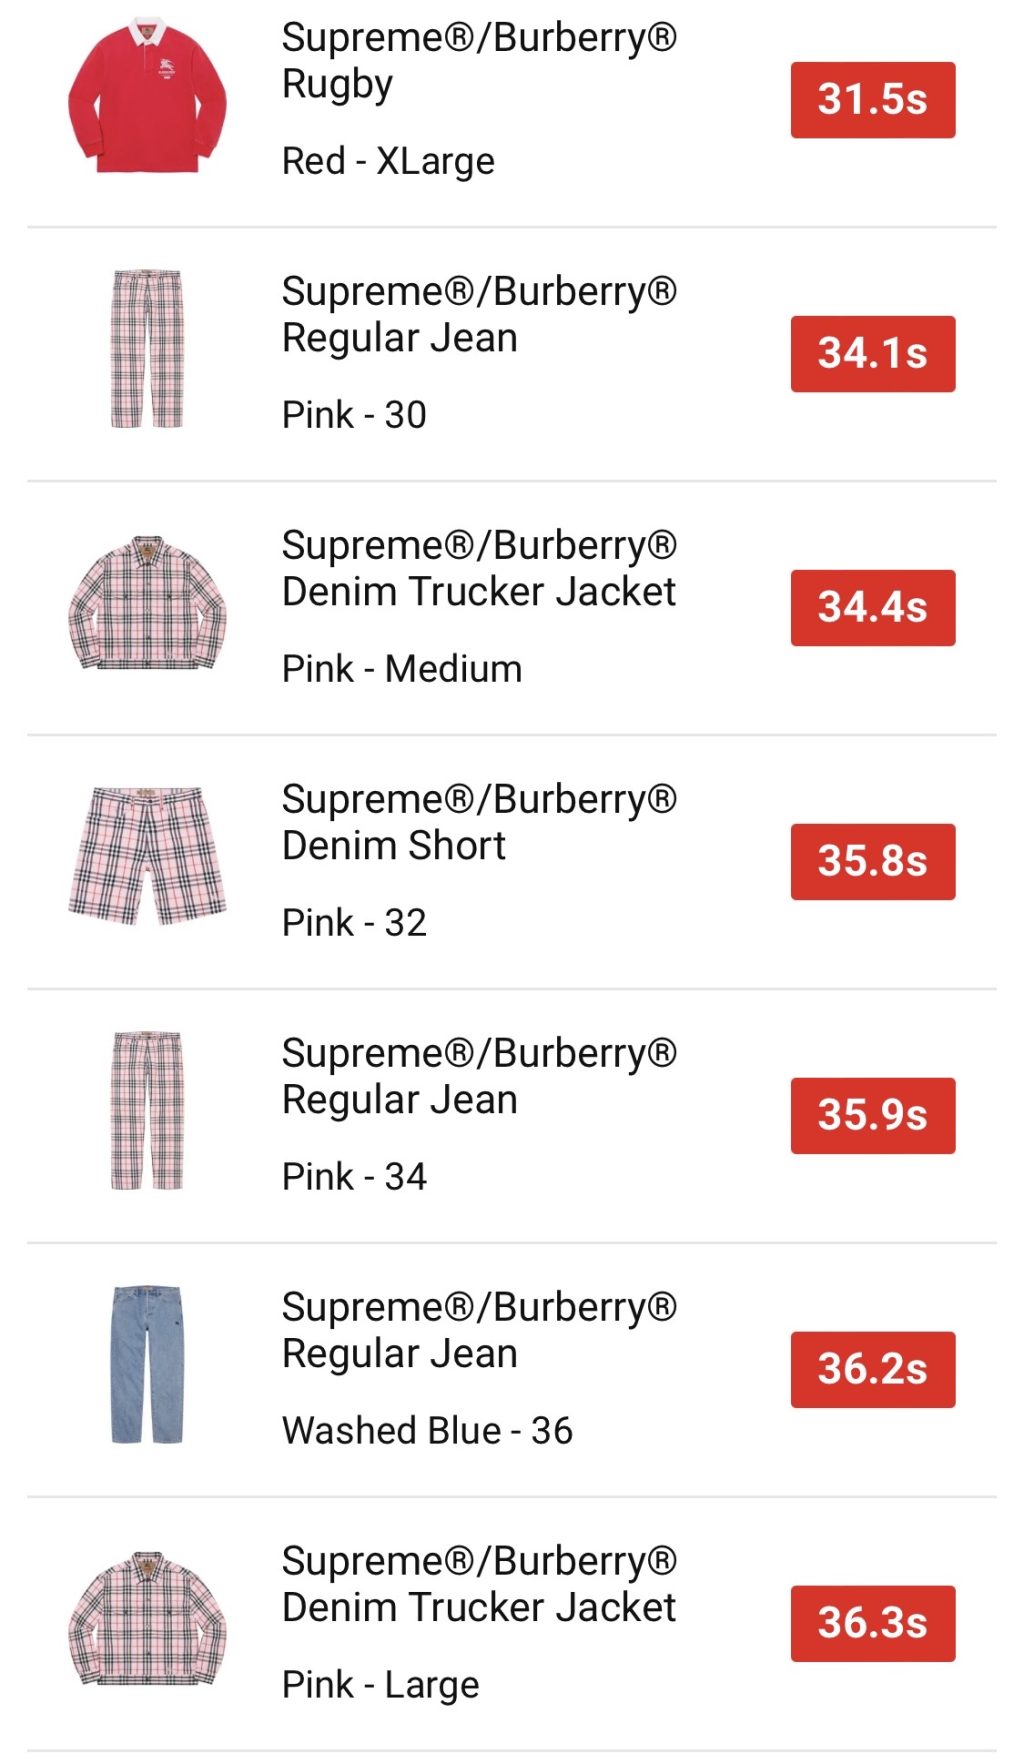 Supreme 公式通販サイトで3月12日 Week3に発売予定の新作アイテム 